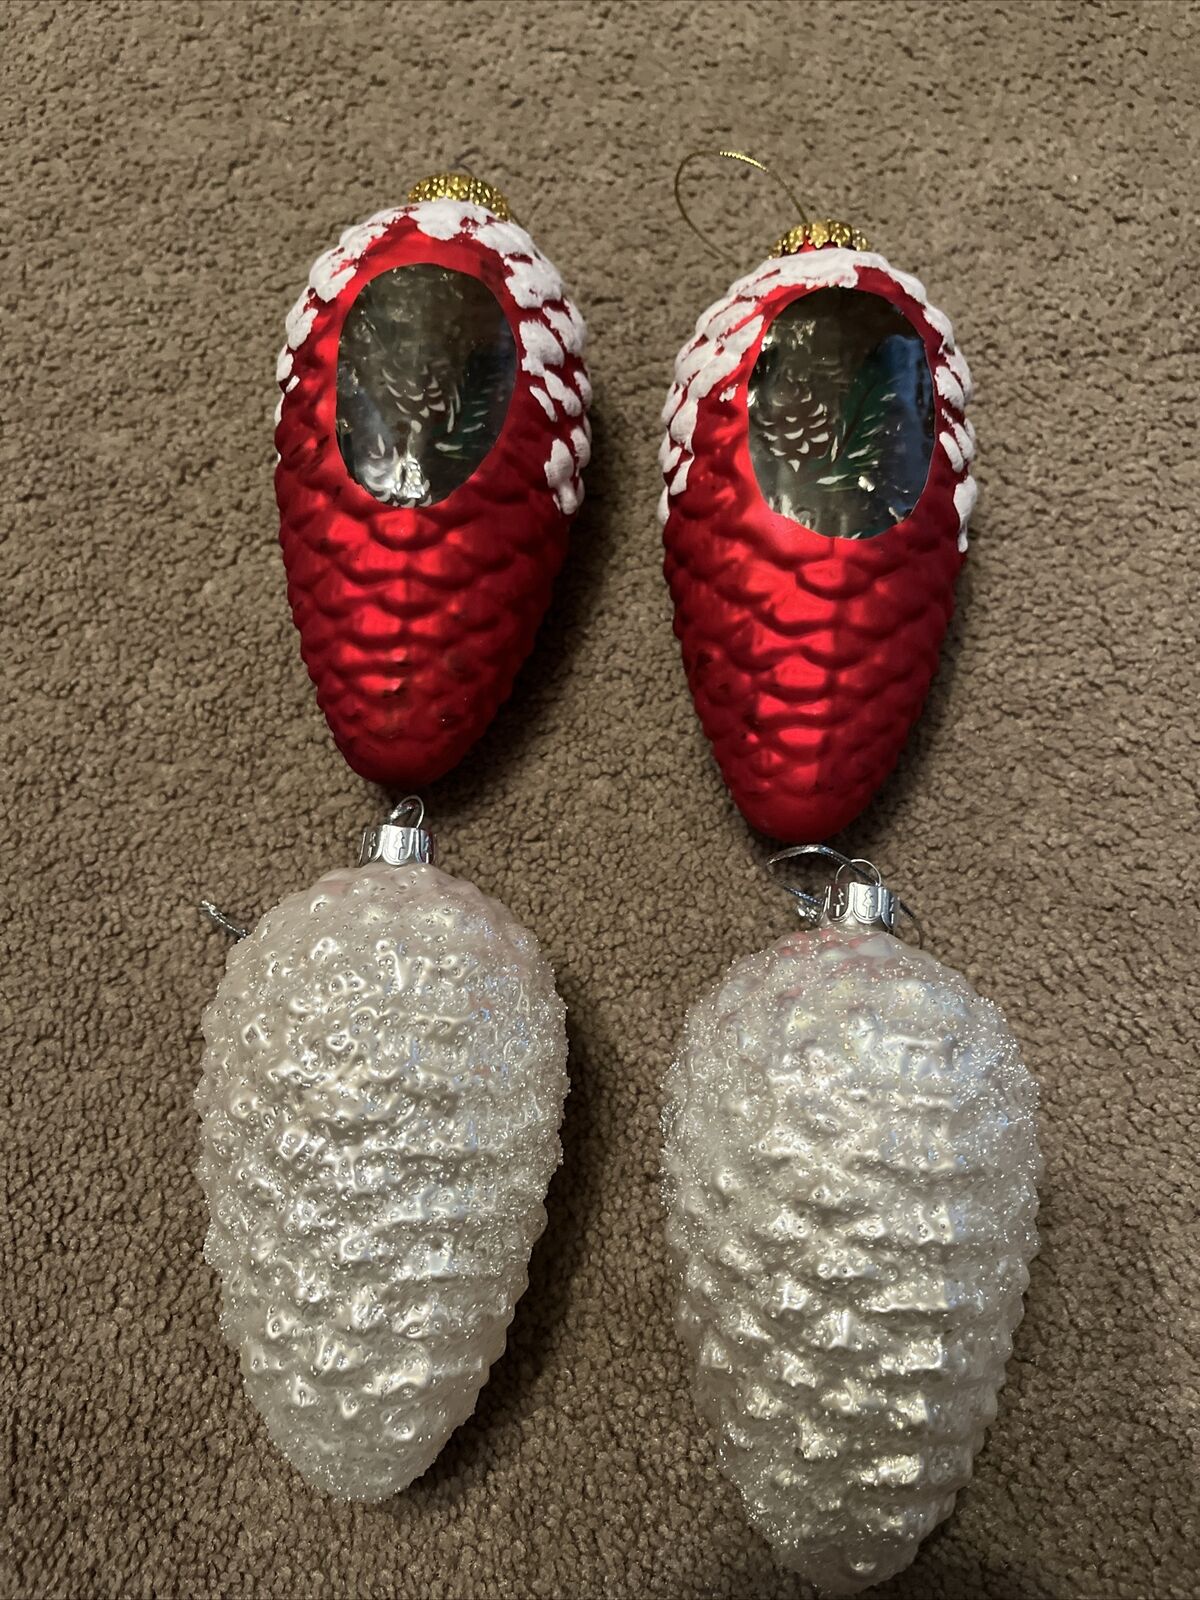 4 Vnt GLASS  PINE CONE ORNAMENTS GLITTER FROST WHITE & RED( WITH SCENE) 5-6 Inch